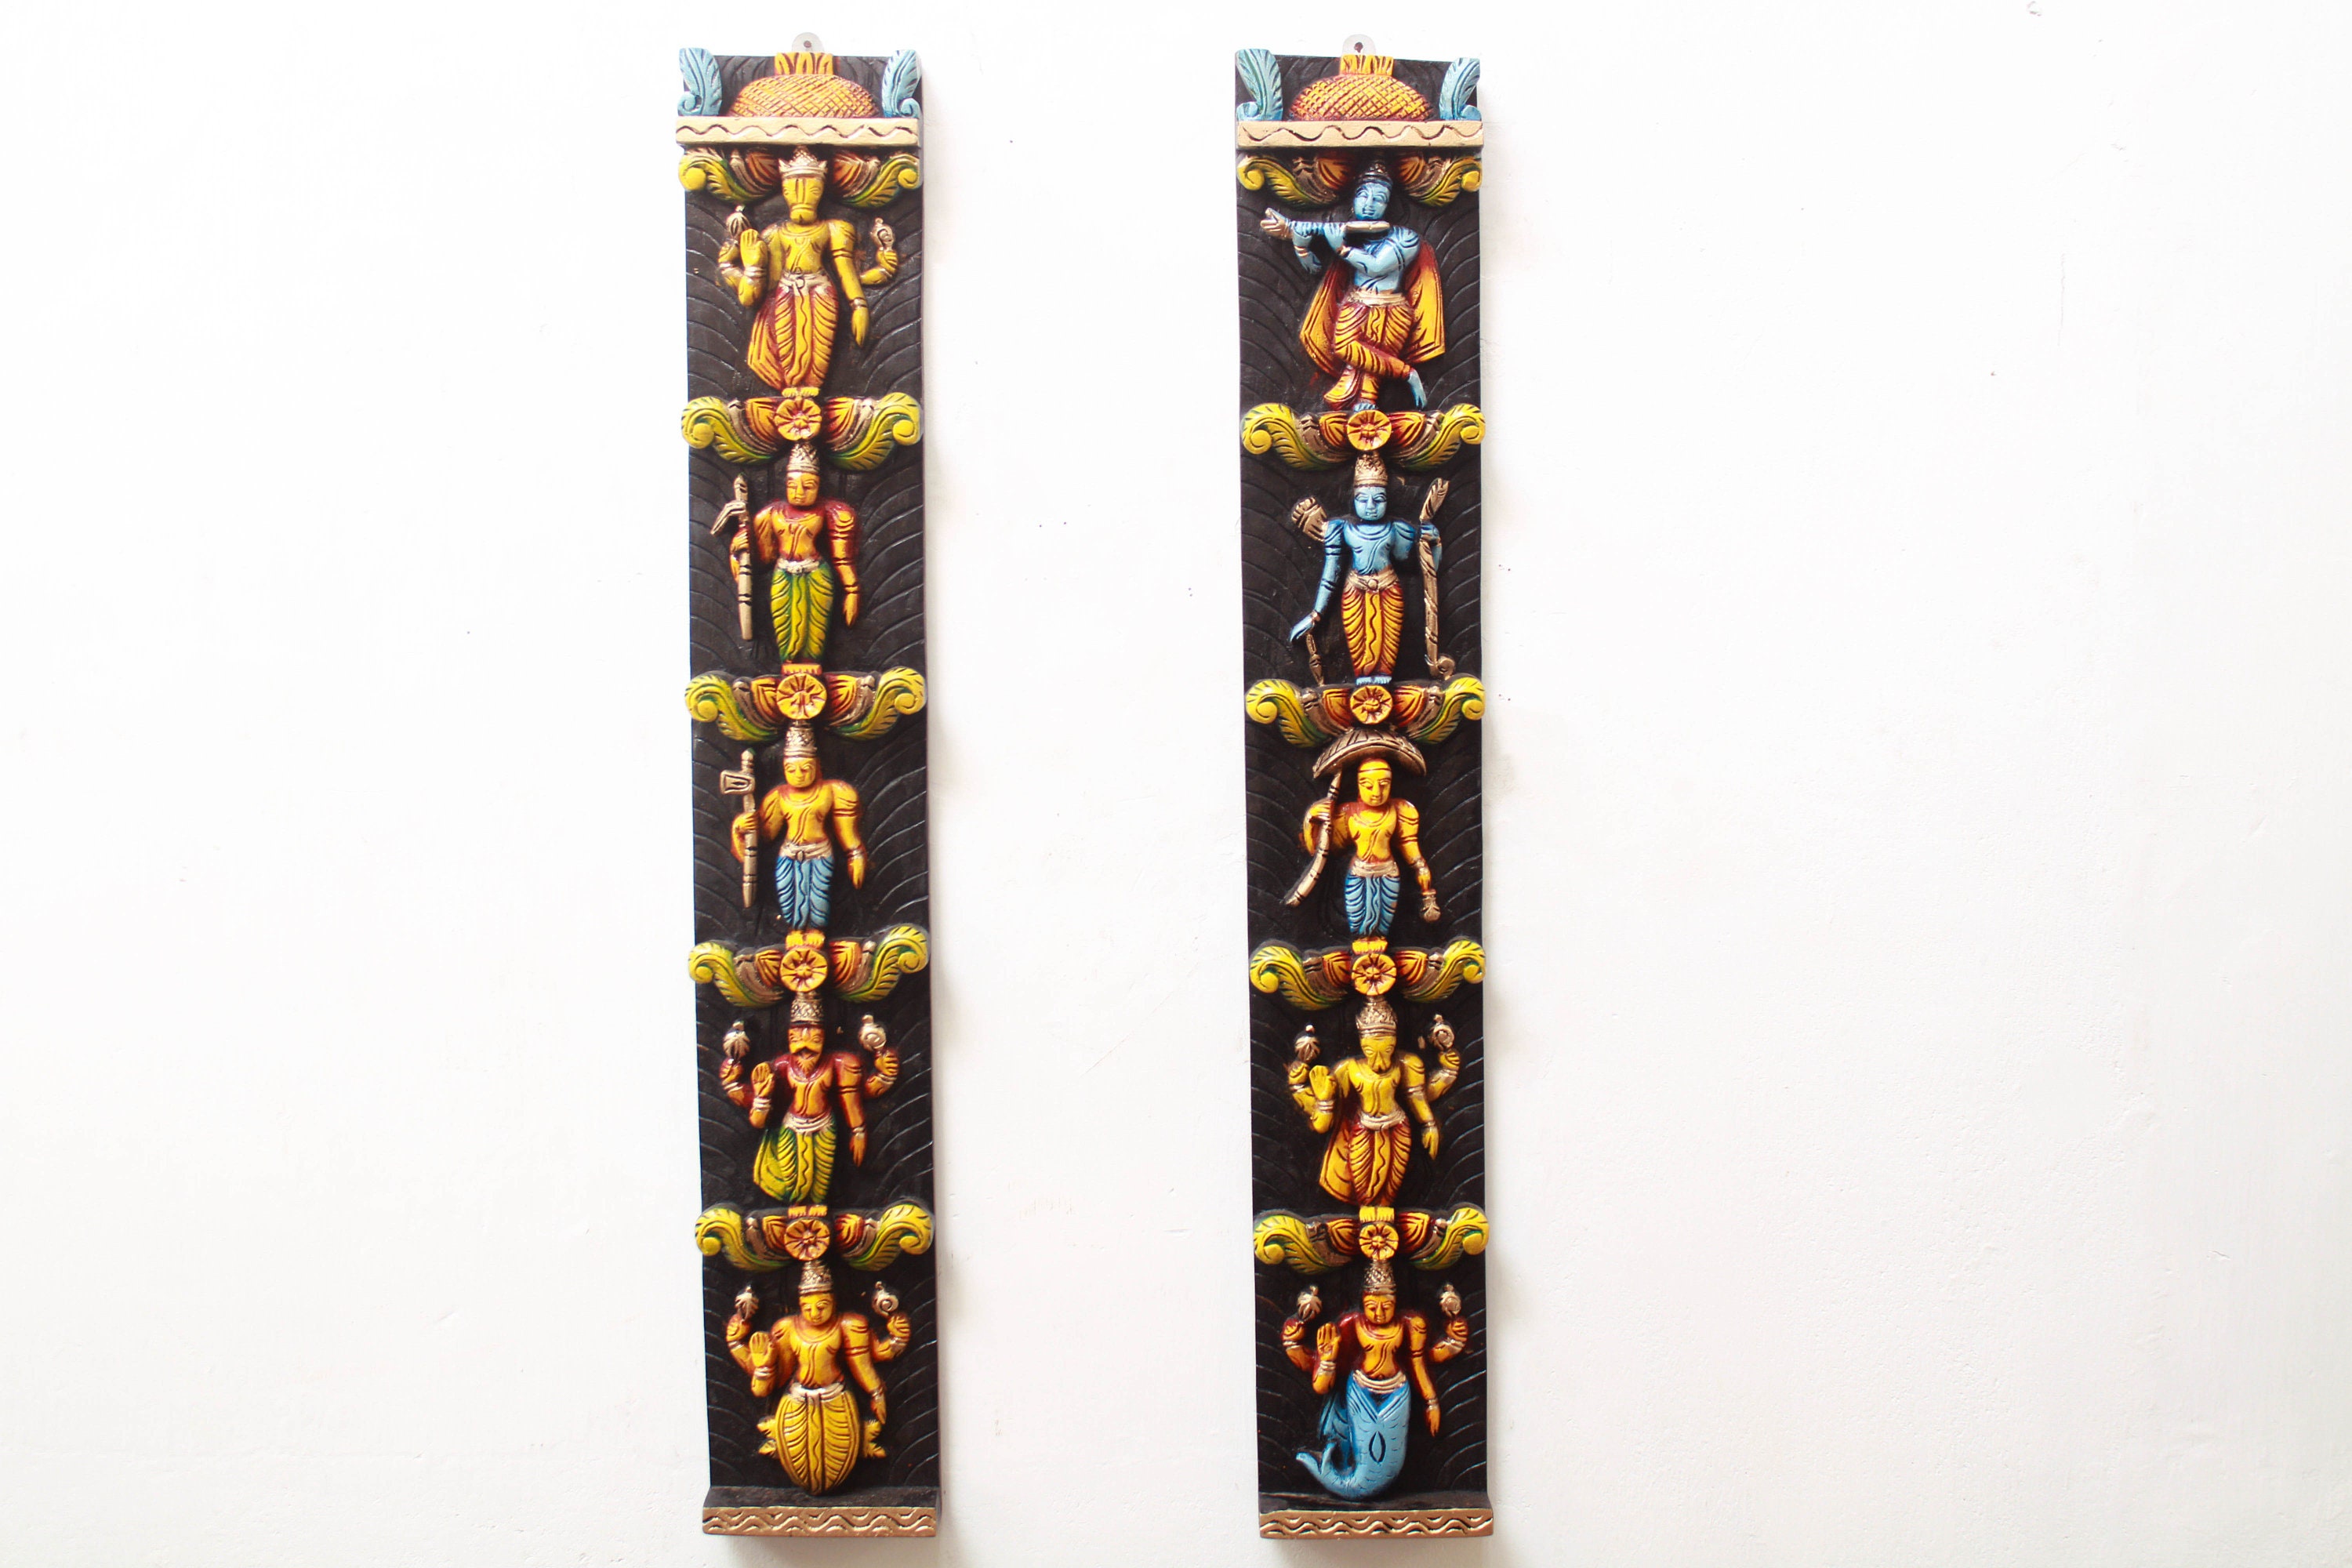 Hare Krishna Hare Rama the mahamantra plate on wood/ dimensions: 6 x 4.74  x 1.5 (in inches)